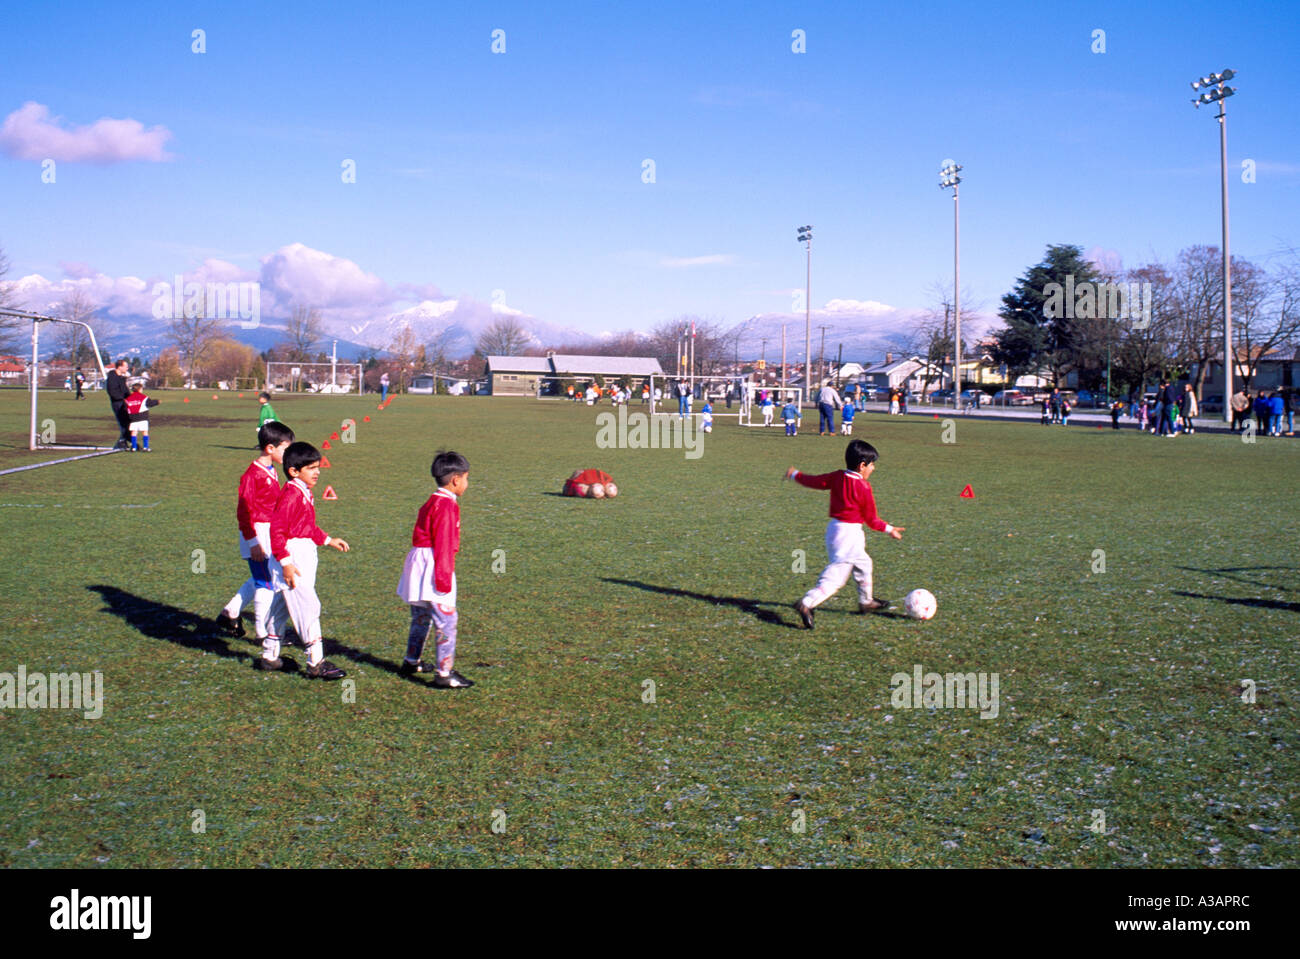 The Youngest Soccer Players in Action on a Sports Field at Killarney Park in the City of Vancouver in British Columbia Canada Stock Photo